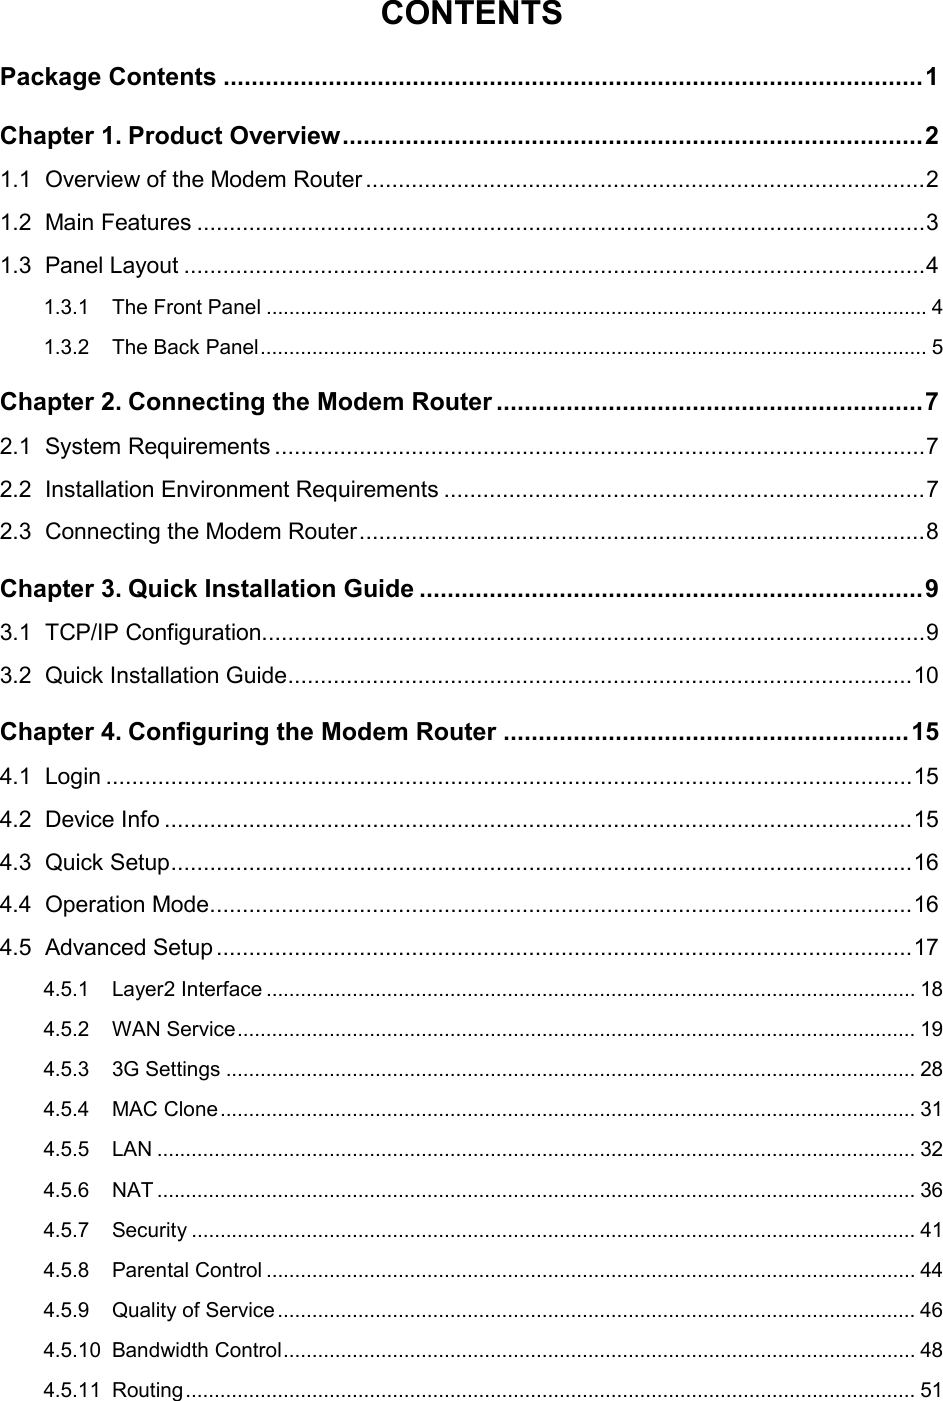  CONTENTS Package Contents .................................................................................................... 1 Chapter 1. Product Overview ................................................................................... 2 1.1 Overview of the Modem Router ...................................................................................... 2 1.2 Main Features ................................................................................................................ 3 1.3 Panel Layout .................................................................................................................. 4 1.3.1 The Front Panel ................................................................................................................... 4 1.3.2 The Back Panel .................................................................................................................... 5 Chapter 2. Connecting the Modem Router ............................................................. 7 2.1 System Requirements .................................................................................................... 7 2.2 Installation Environment Requirements .......................................................................... 7 2.3 Connecting the Modem Router ....................................................................................... 8 Chapter 3. Quick Installation Guide ........................................................................ 9 3.1 TCP/IP Configuration...................................................................................................... 9 3.2 Quick Installation Guide ................................................................................................ 10 Chapter 4. Configuring the Modem Router .......................................................... 15 4.1 Login ............................................................................................................................ 15 4.2 Device Info ................................................................................................................... 15 4.3 Quick Setup .................................................................................................................. 16 4.4 Operation Mode ............................................................................................................ 16 4.5 Advanced Setup ........................................................................................................... 17 4.5.1 Layer2 Interface ................................................................................................................. 18 4.5.2 WAN Service ...................................................................................................................... 19 4.5.3 3G Settings ........................................................................................................................ 28 4.5.4 MAC Clone ......................................................................................................................... 31 4.5.5 LAN .................................................................................................................................... 32 4.5.6 NAT .................................................................................................................................... 36 4.5.7 Security .............................................................................................................................. 41 4.5.8 Parental Control ................................................................................................................. 44 4.5.9 Quality of Service ............................................................................................................... 46 4.5.10 Bandwidth Control .............................................................................................................. 48 4.5.11 Routing ............................................................................................................................... 51  